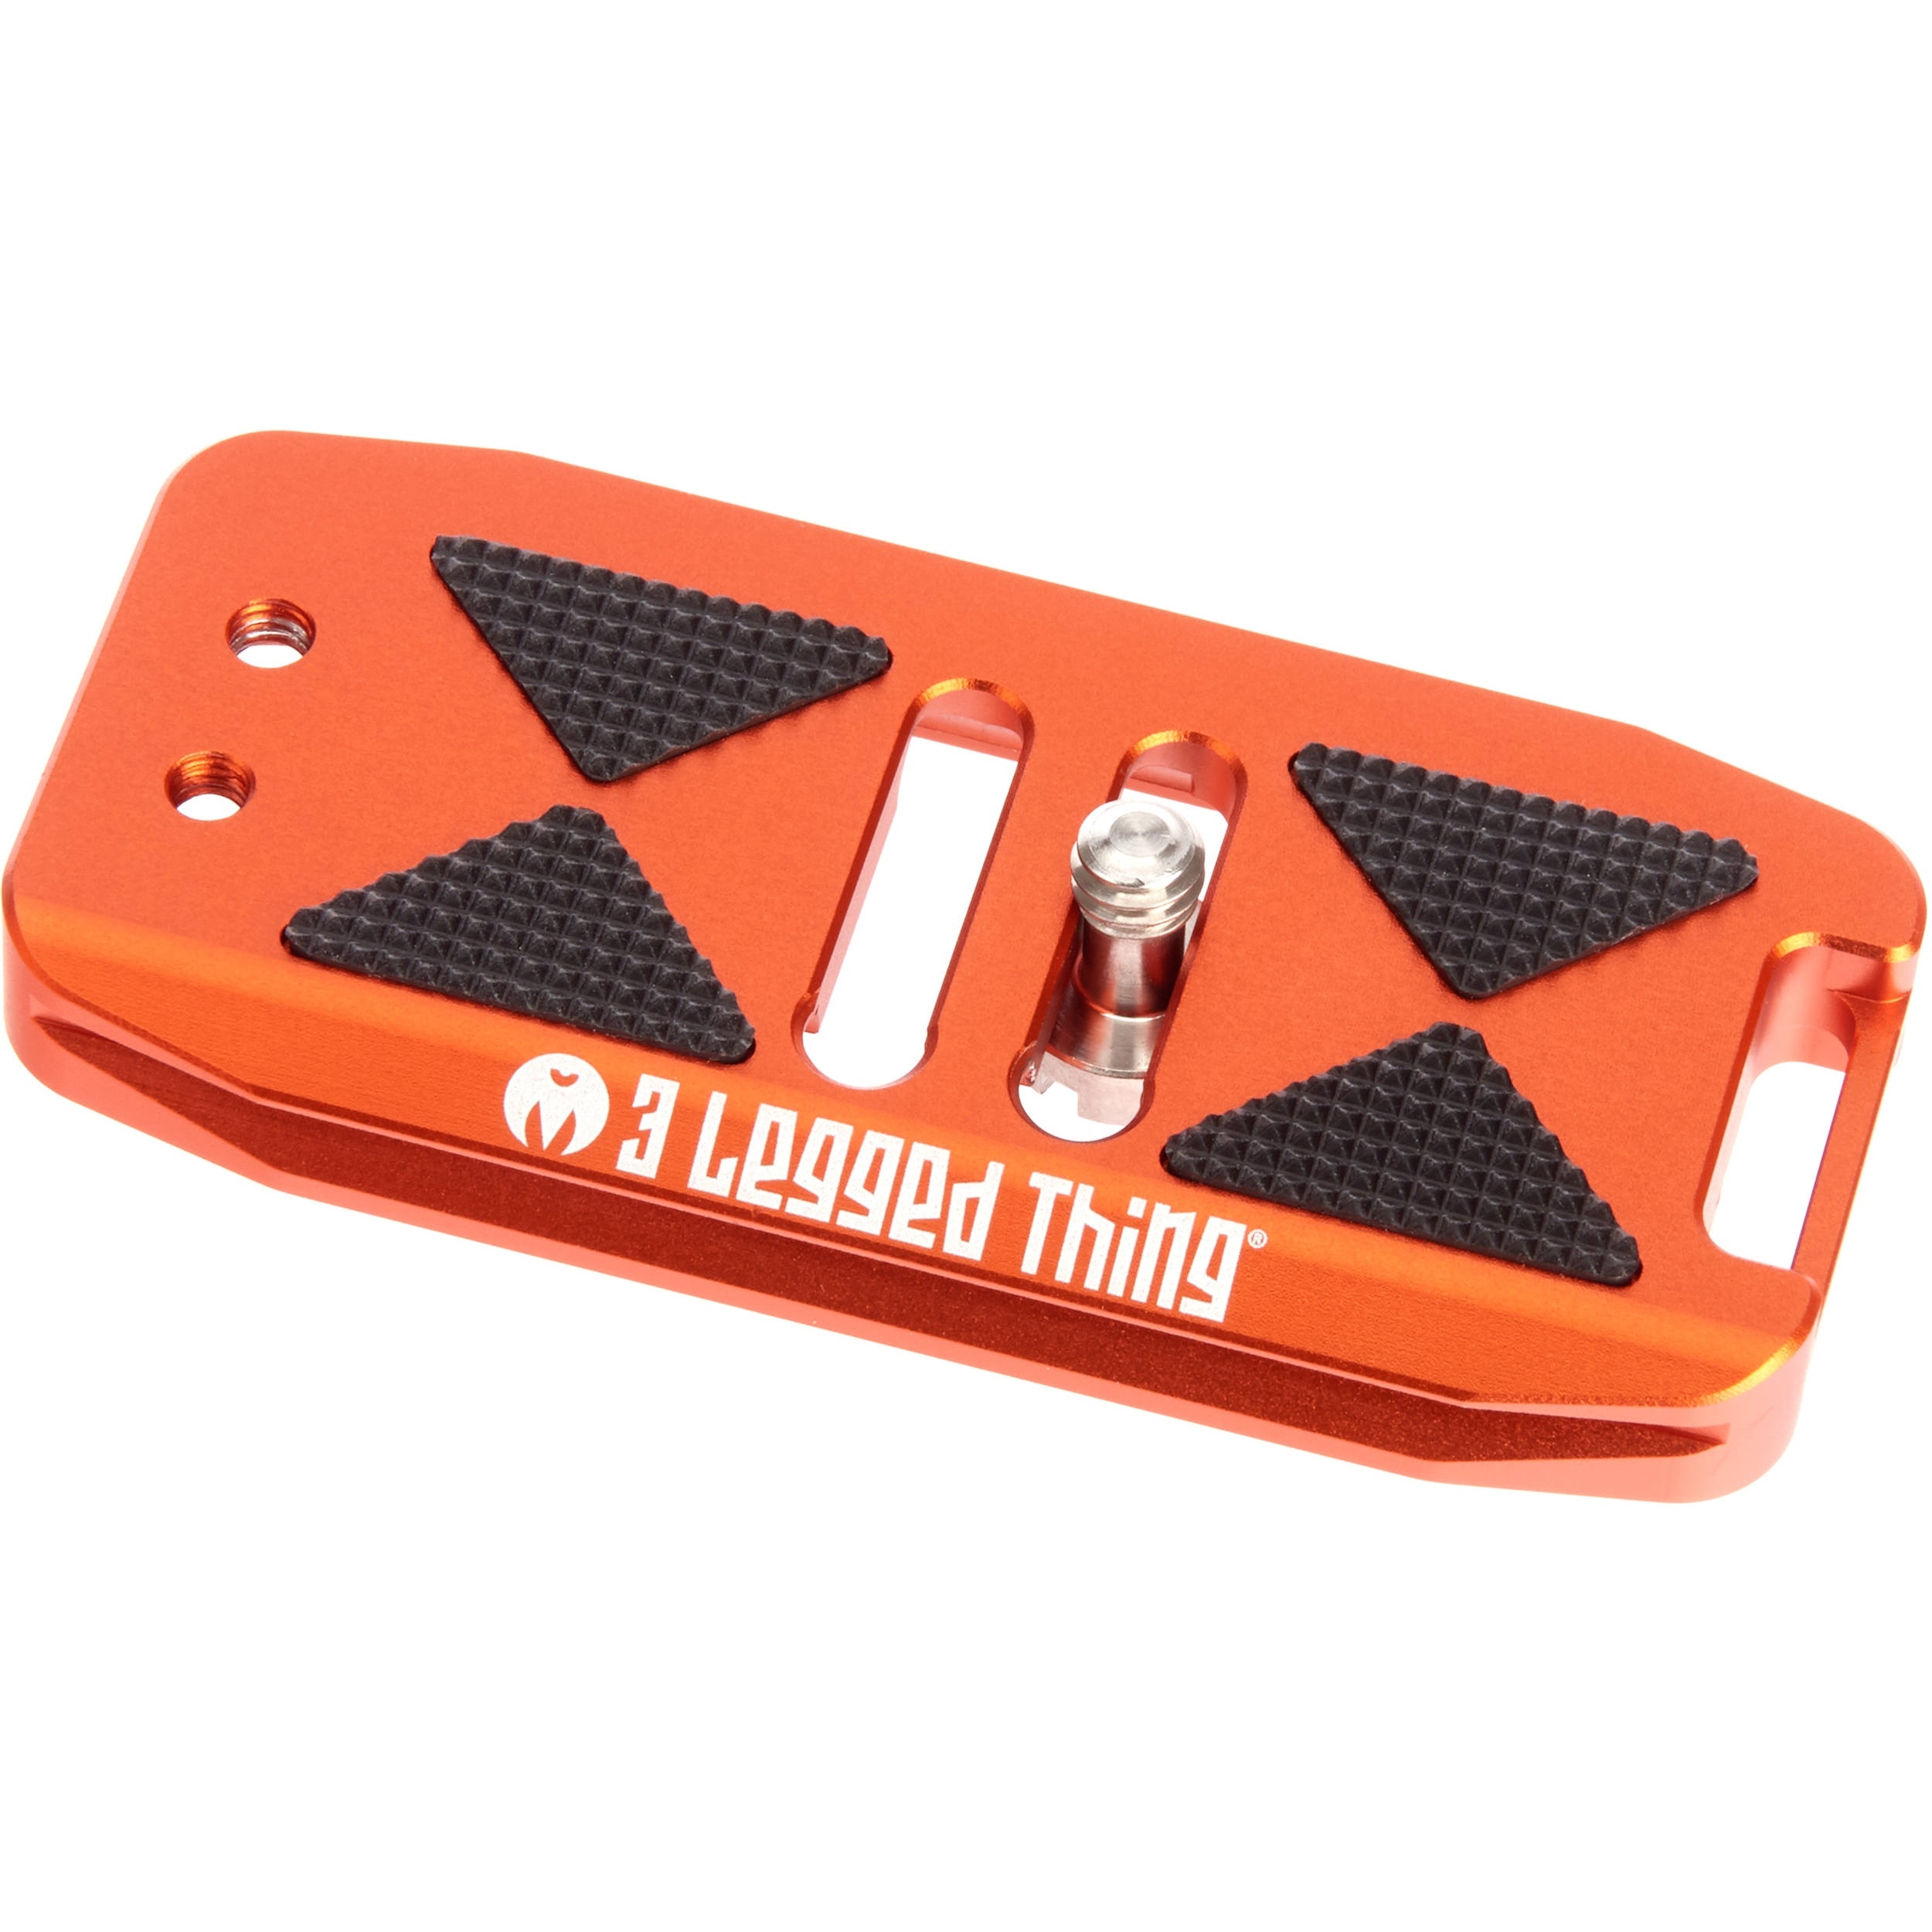 3 Legged Thing BASE85 Arca-Swiss Compatible 85mm Wide Quick Release Plate (Copper/Orange)